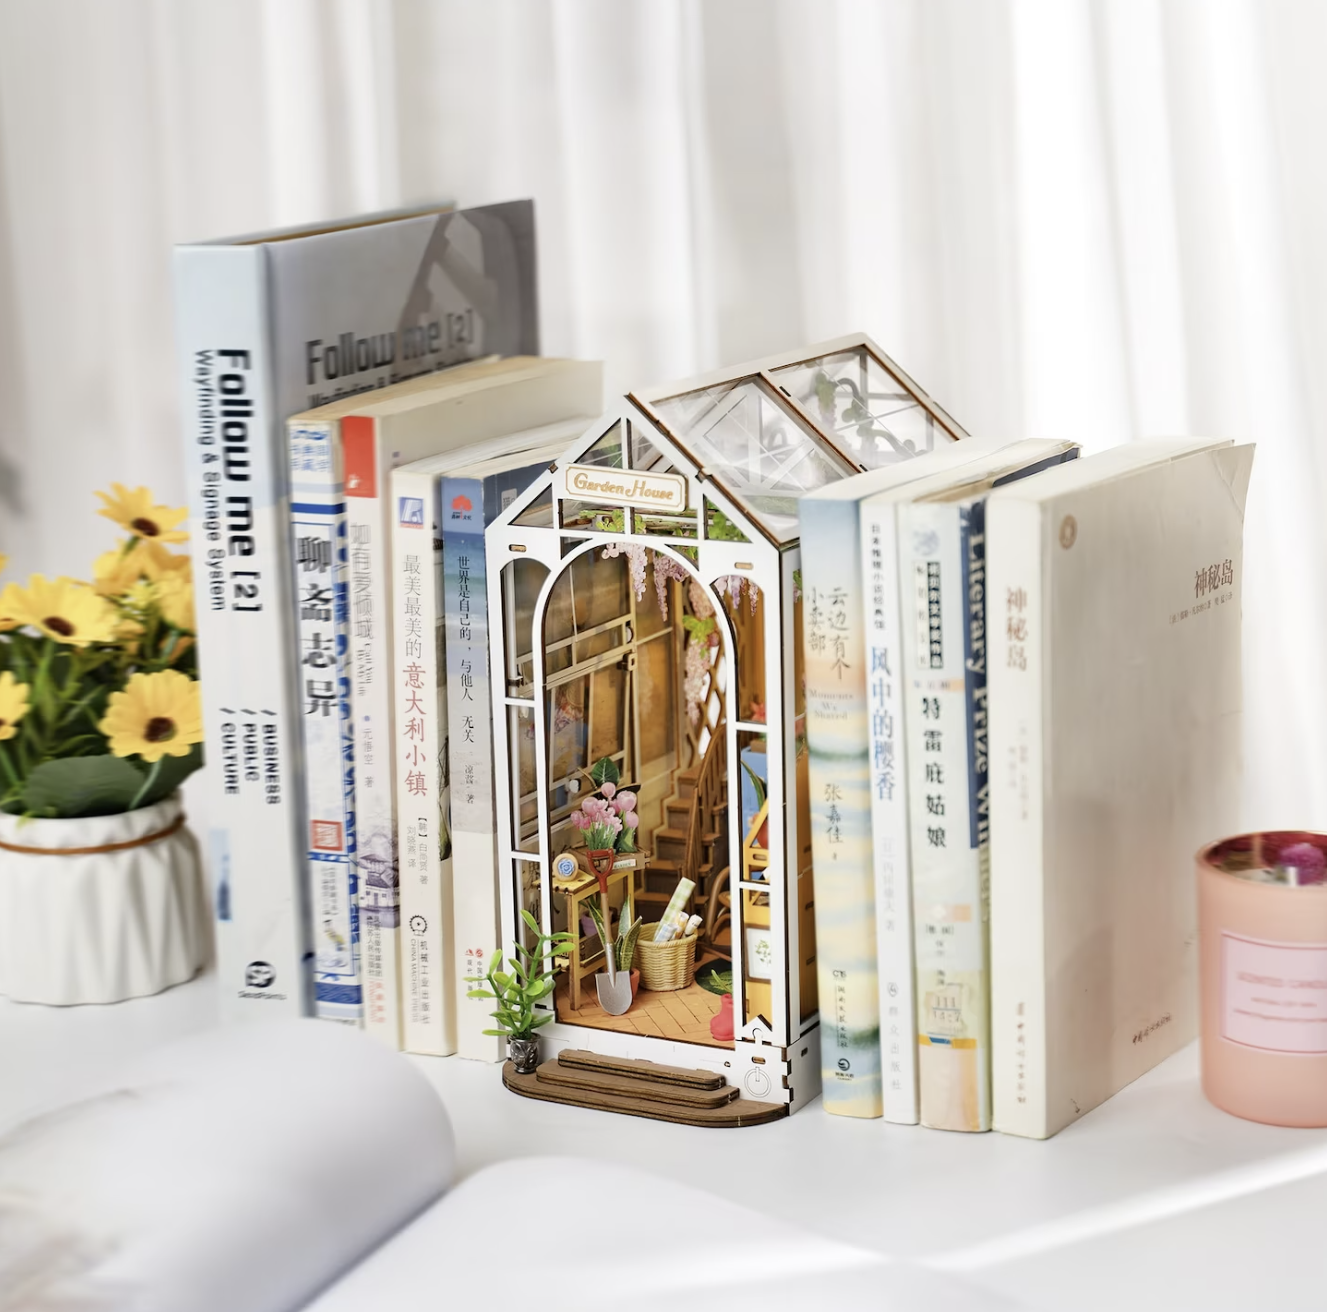 A series of white books lined up with a rectangular book nook in the shape of a greenhouse garden featuring lots of plants in between.